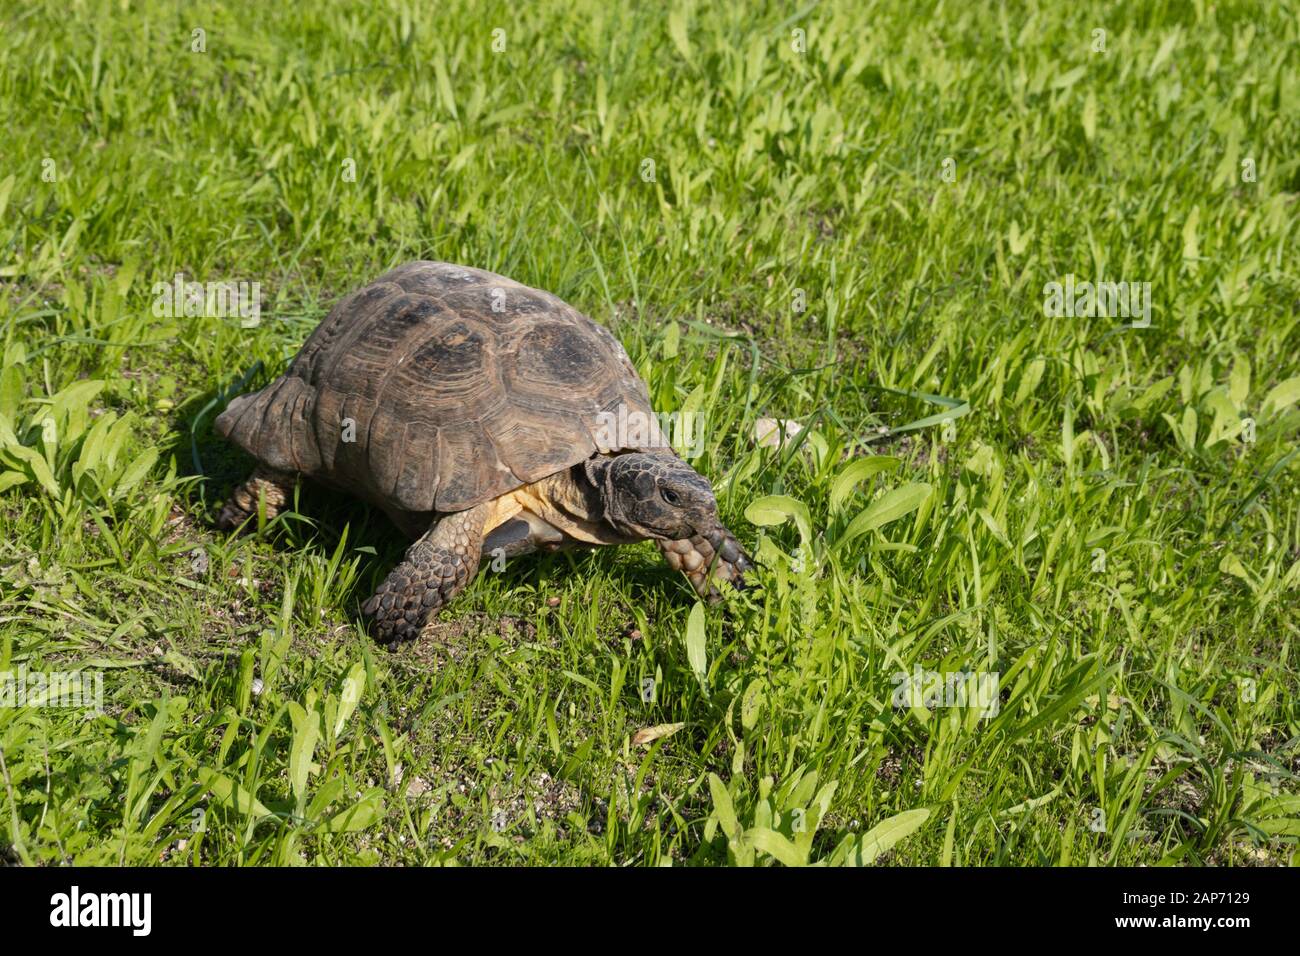 Turtle in Athens, Greece, on the sights of Acropolis monument on green grass Stock Photo